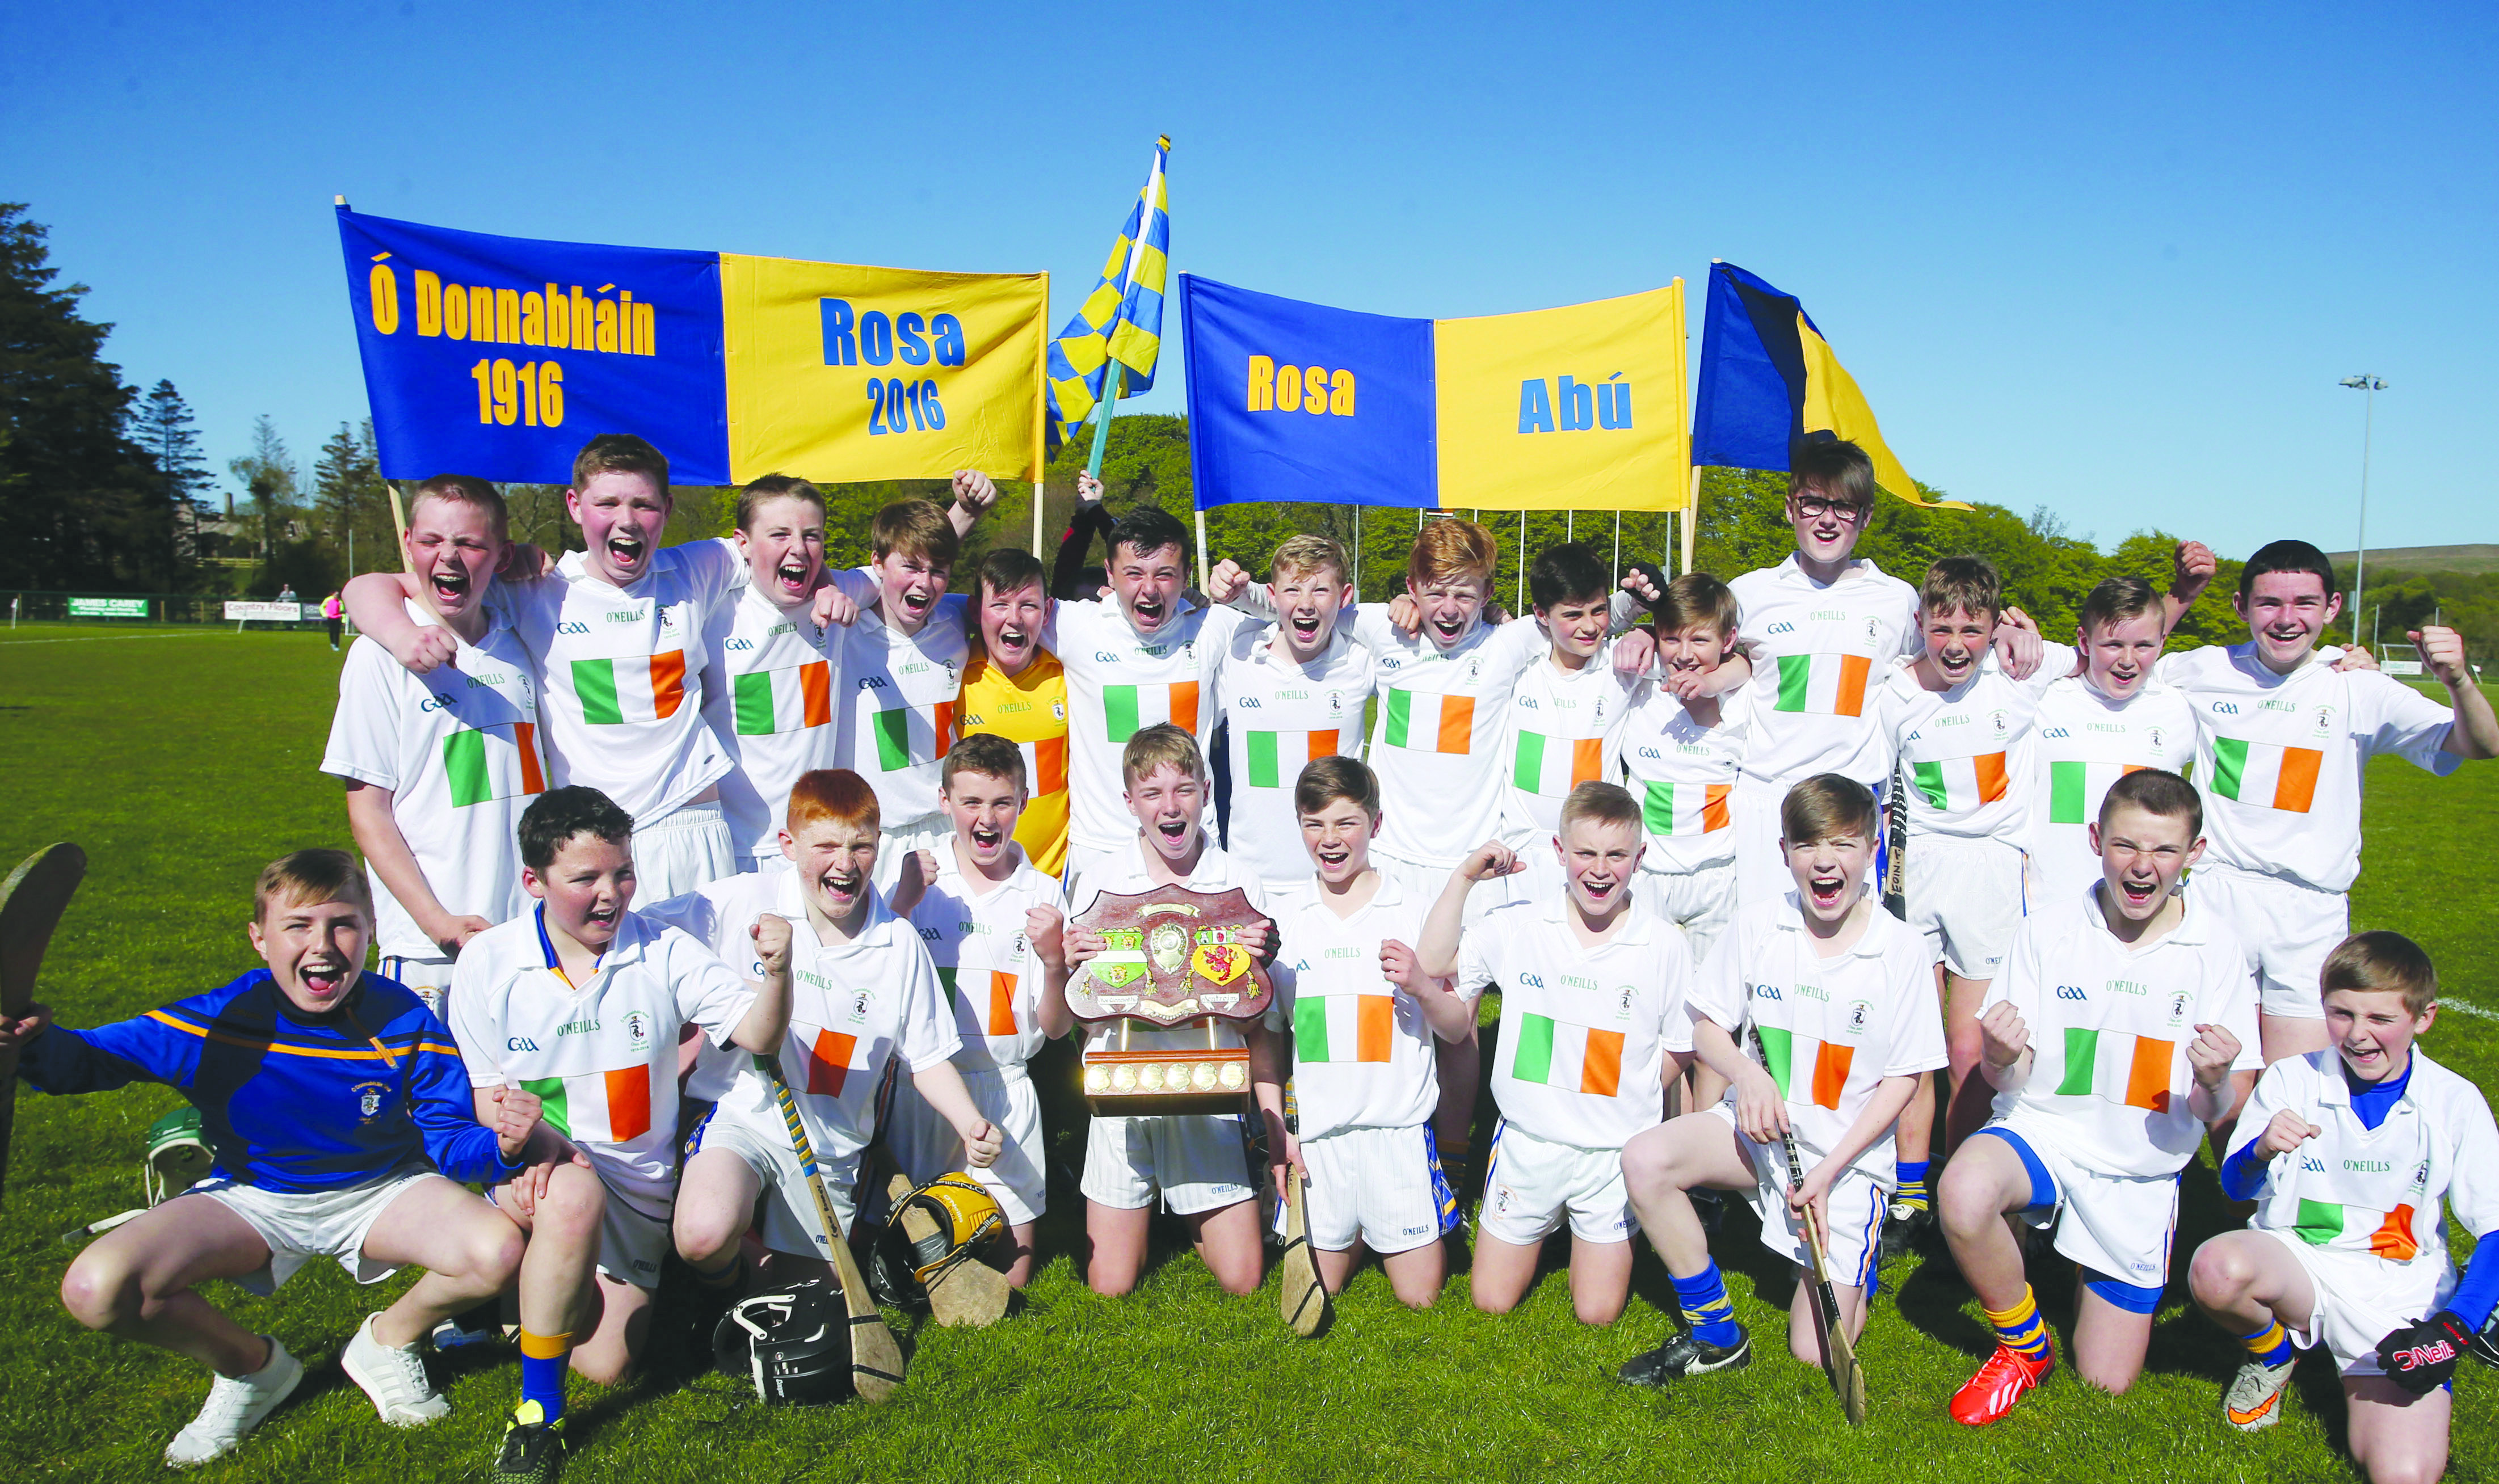 The Rossa team with the Antrim Feile hurling trophy following thier win over Loughgiel on Saturday